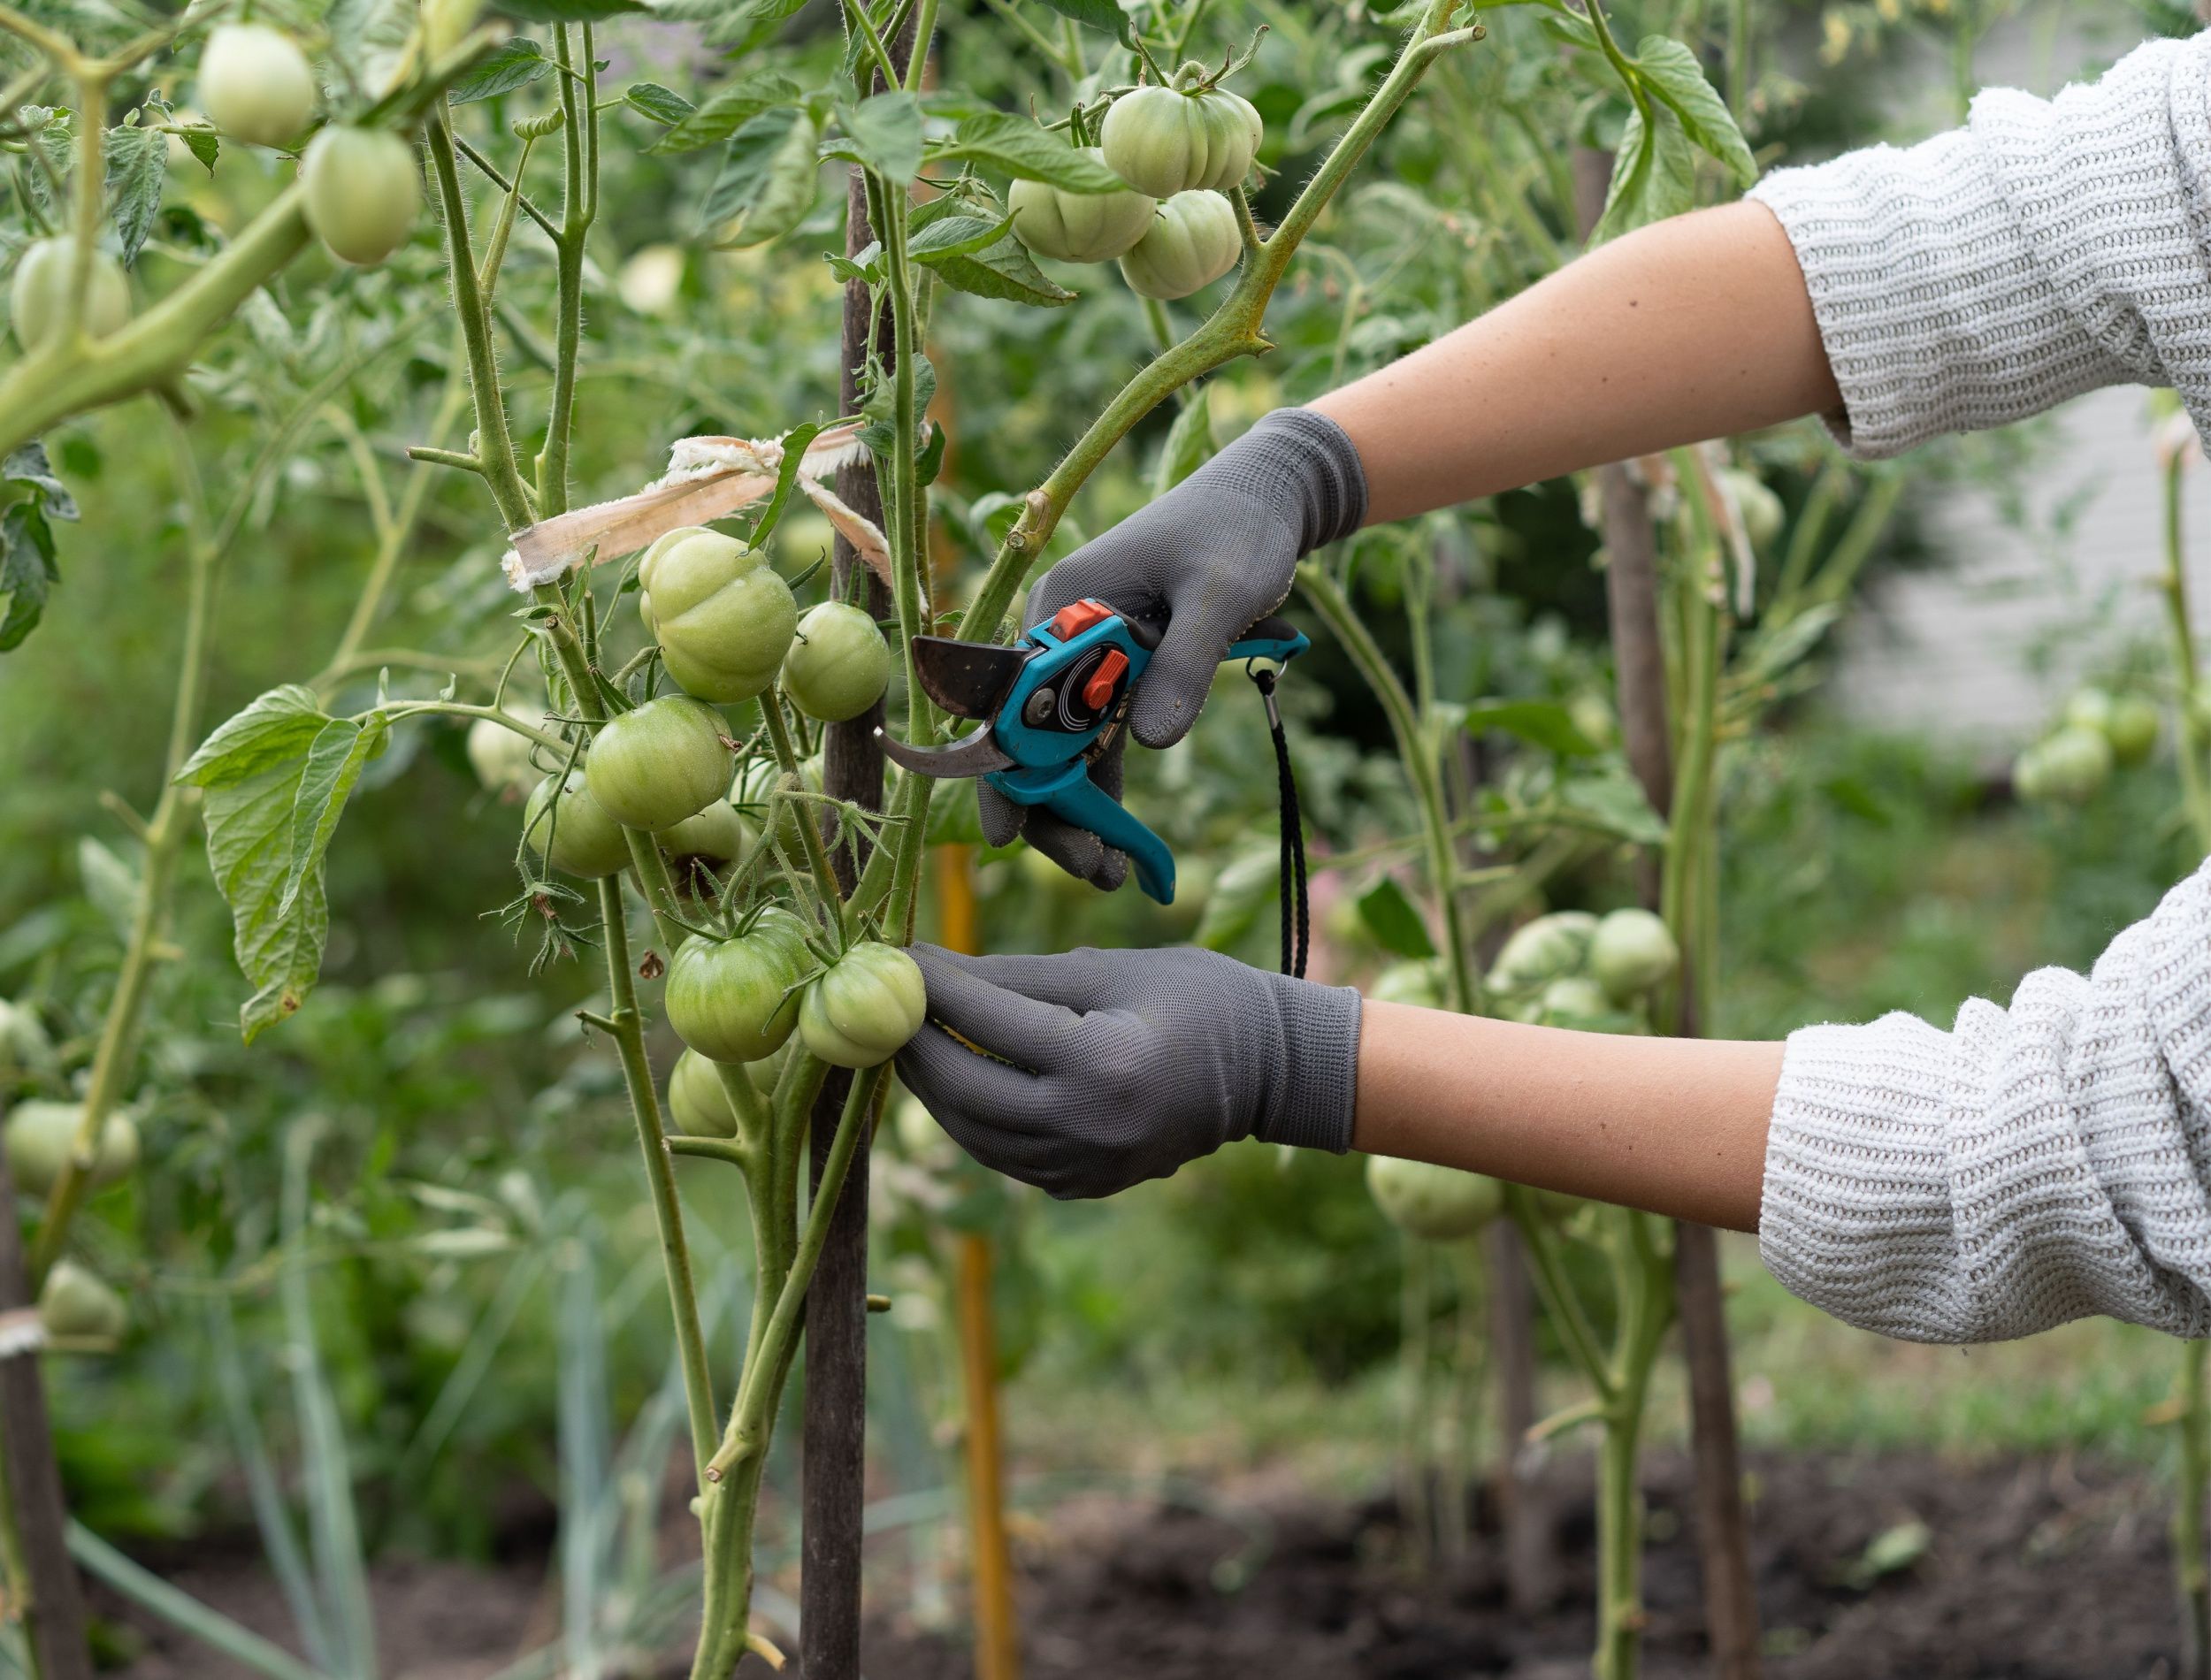 How to Properly Prune Your Tomato Plants